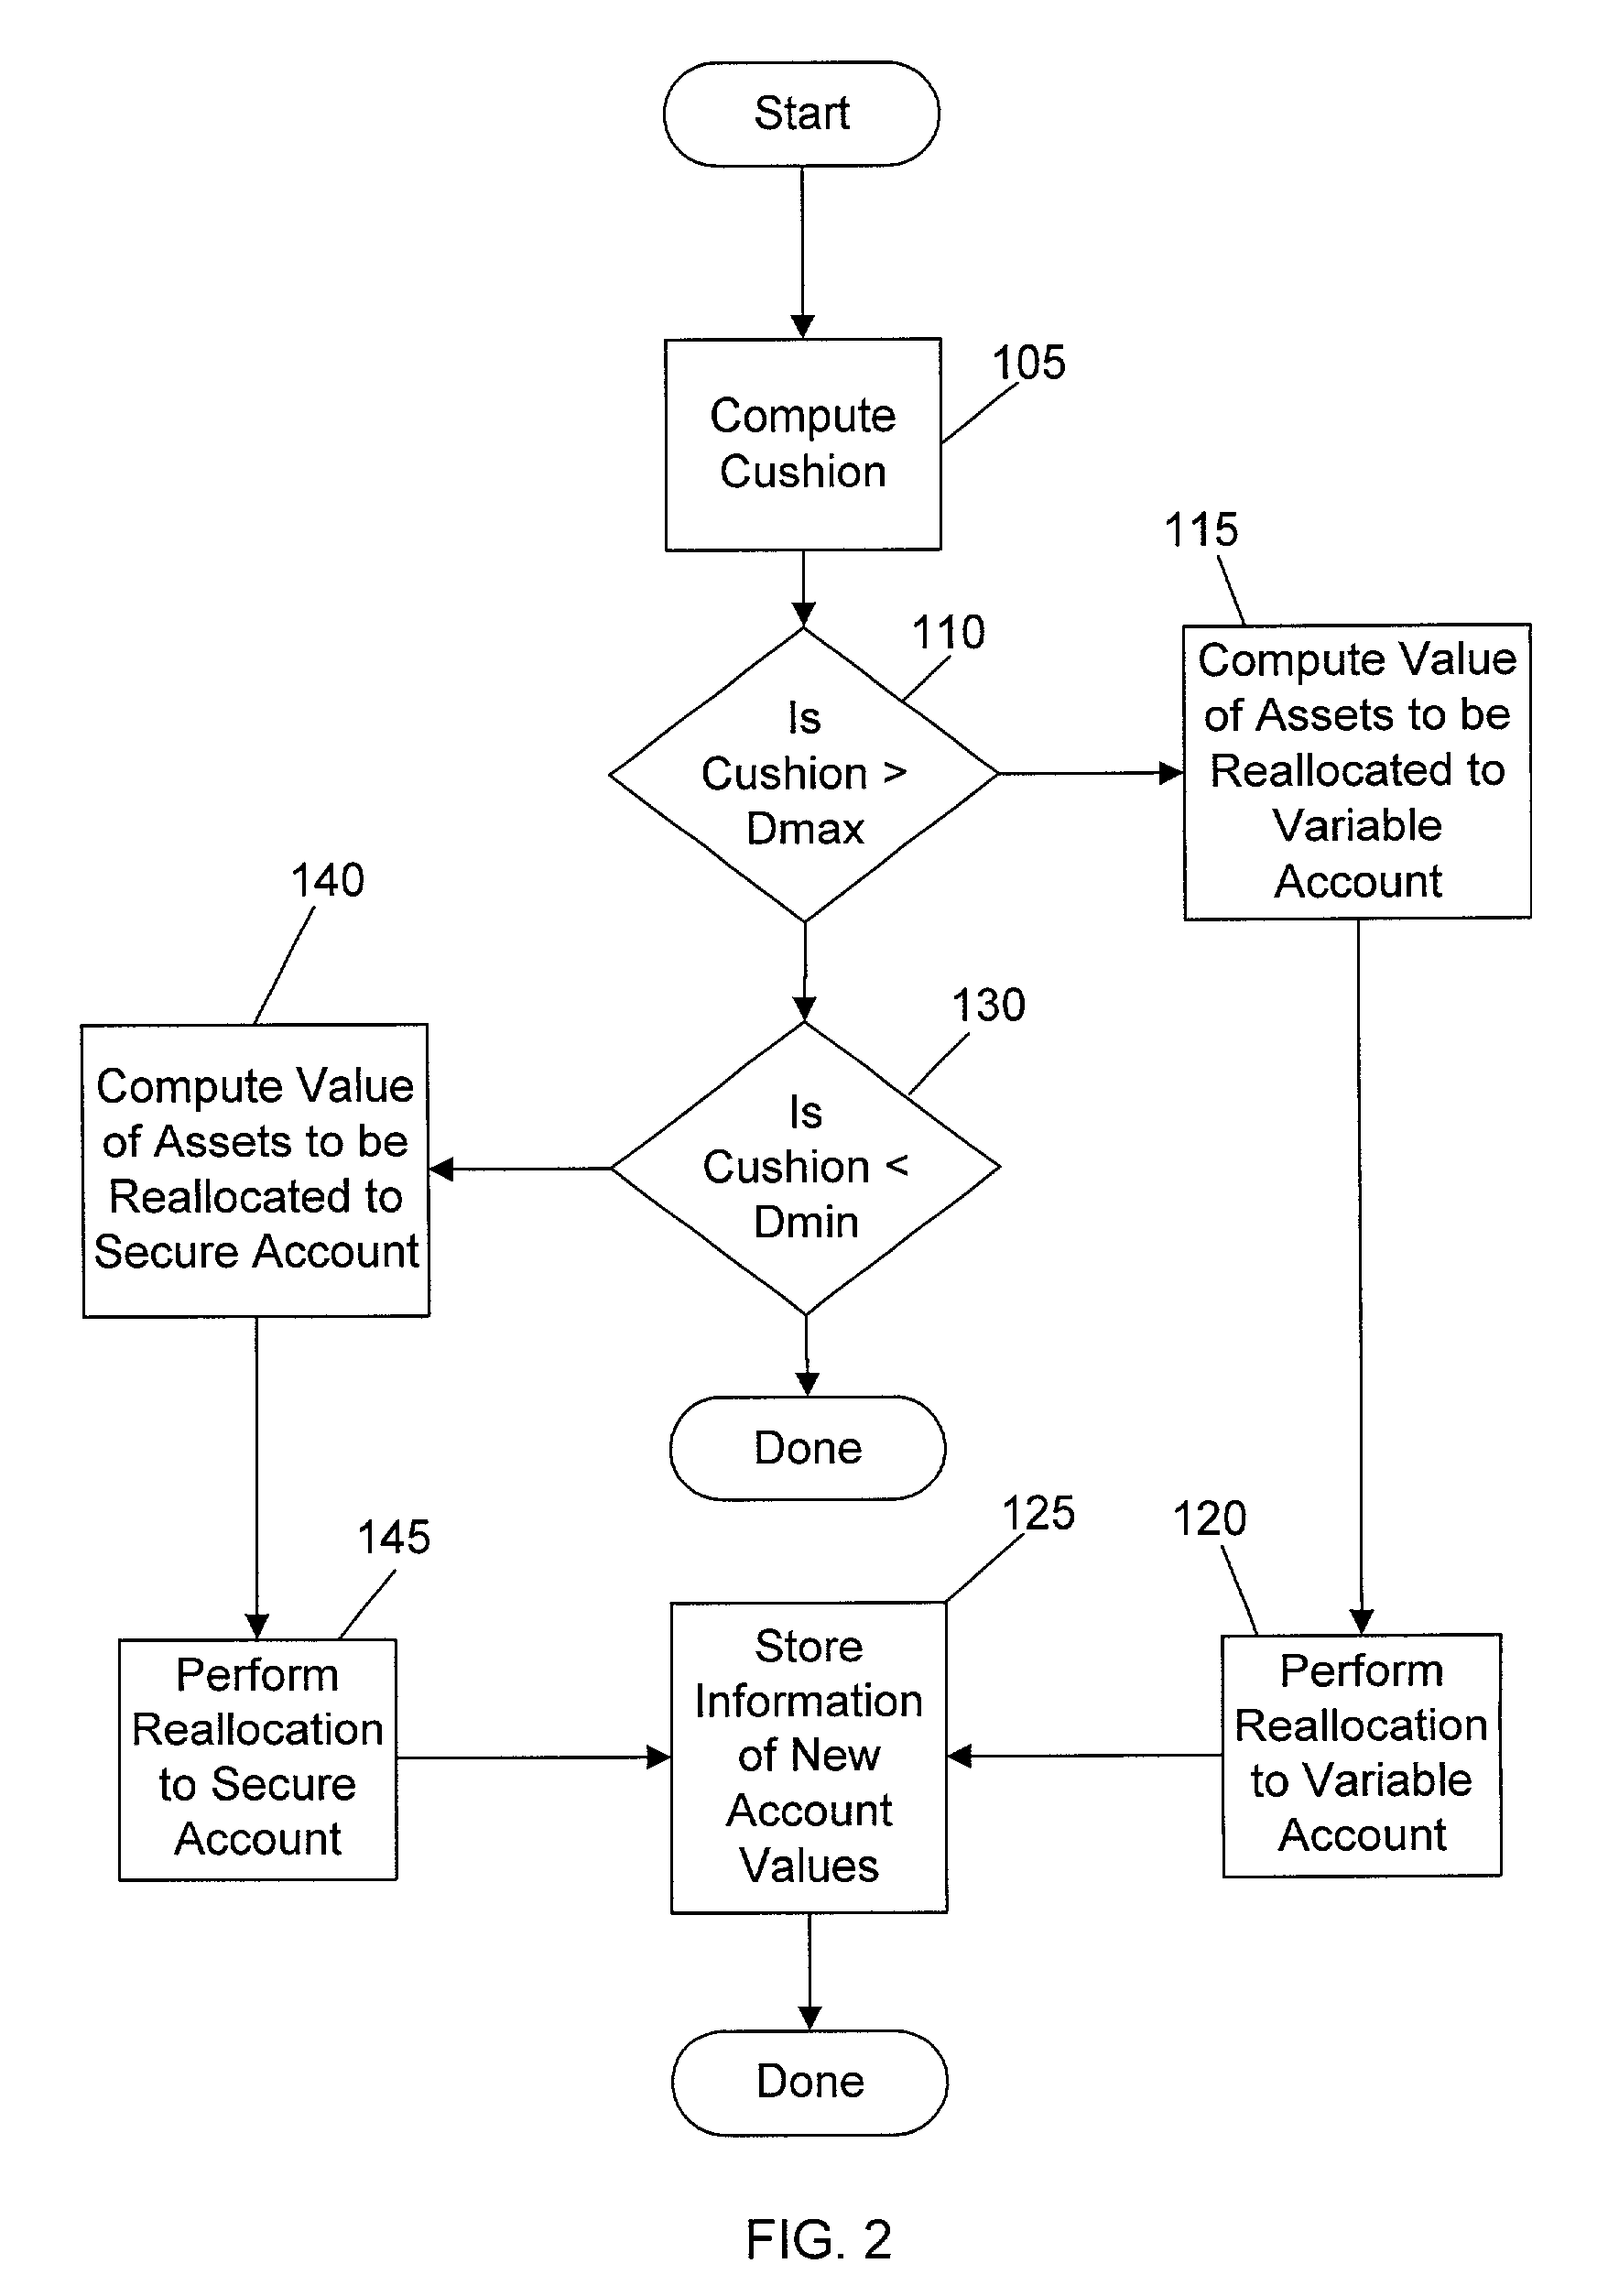 System, method, and computer program product for allocating assets among a plurality of investments to guarantee a predetermined value at the end of a predetermined time period